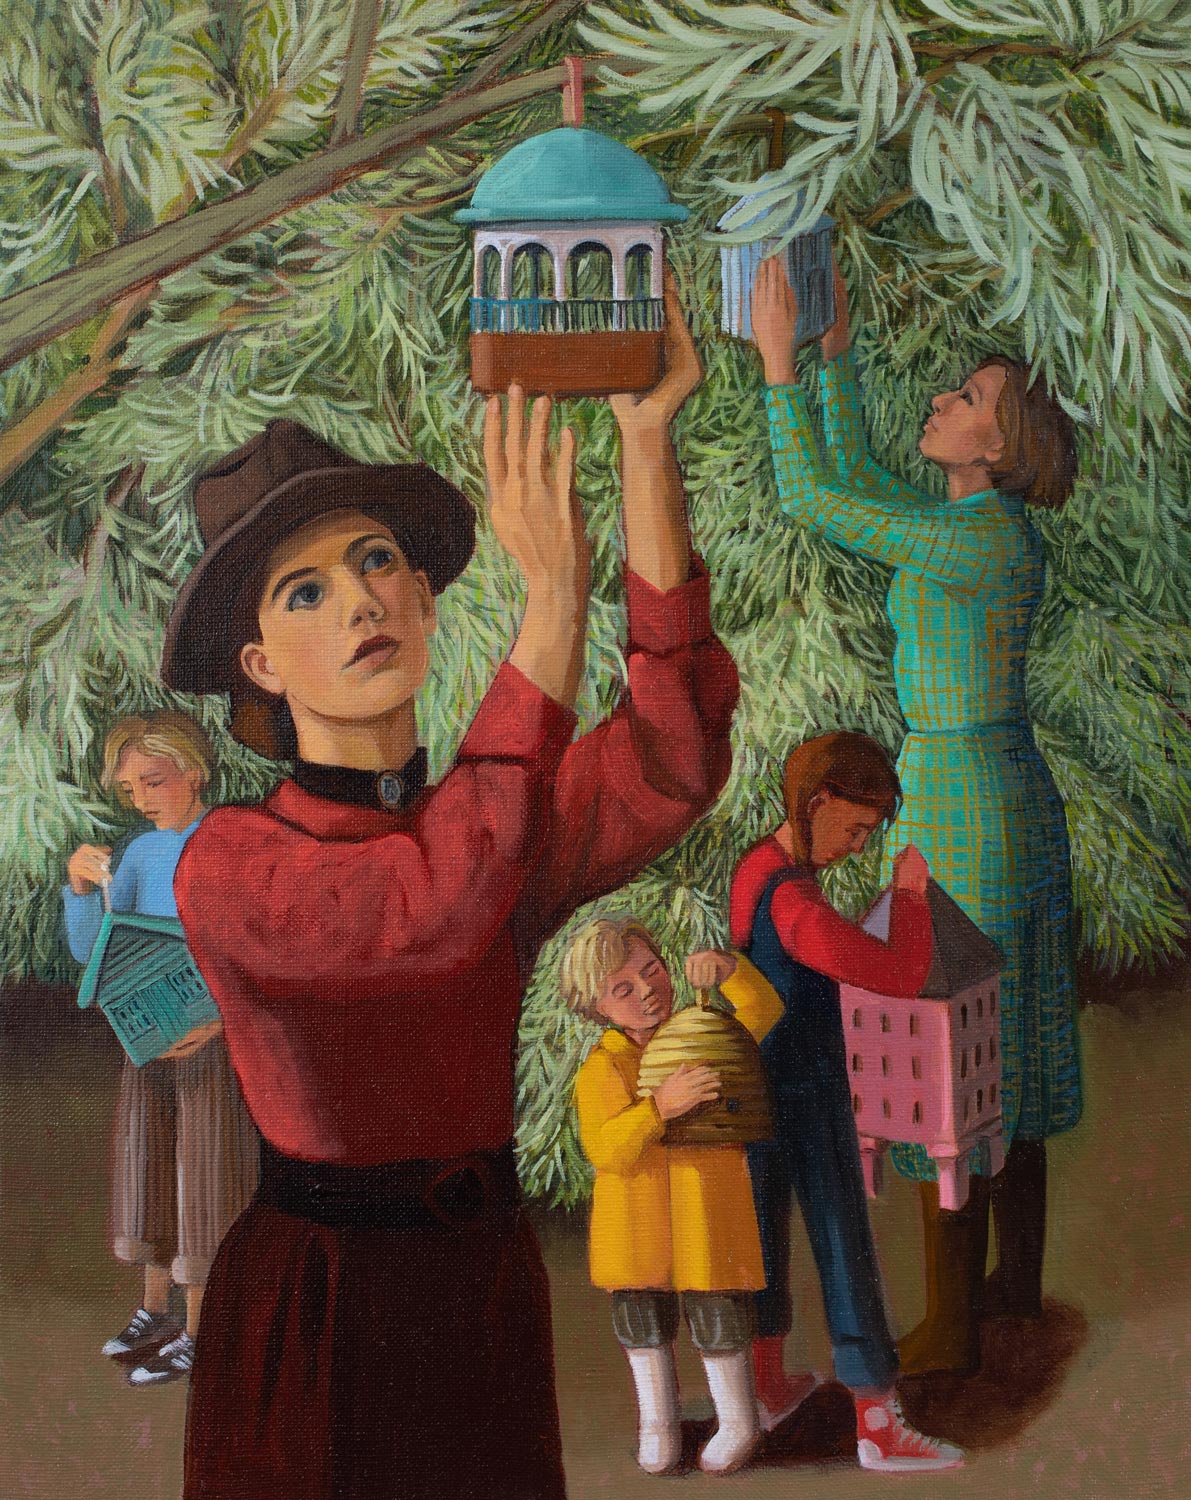 Painting by Ann McCay depicting a family group decorating willow trees. Oil on canvas